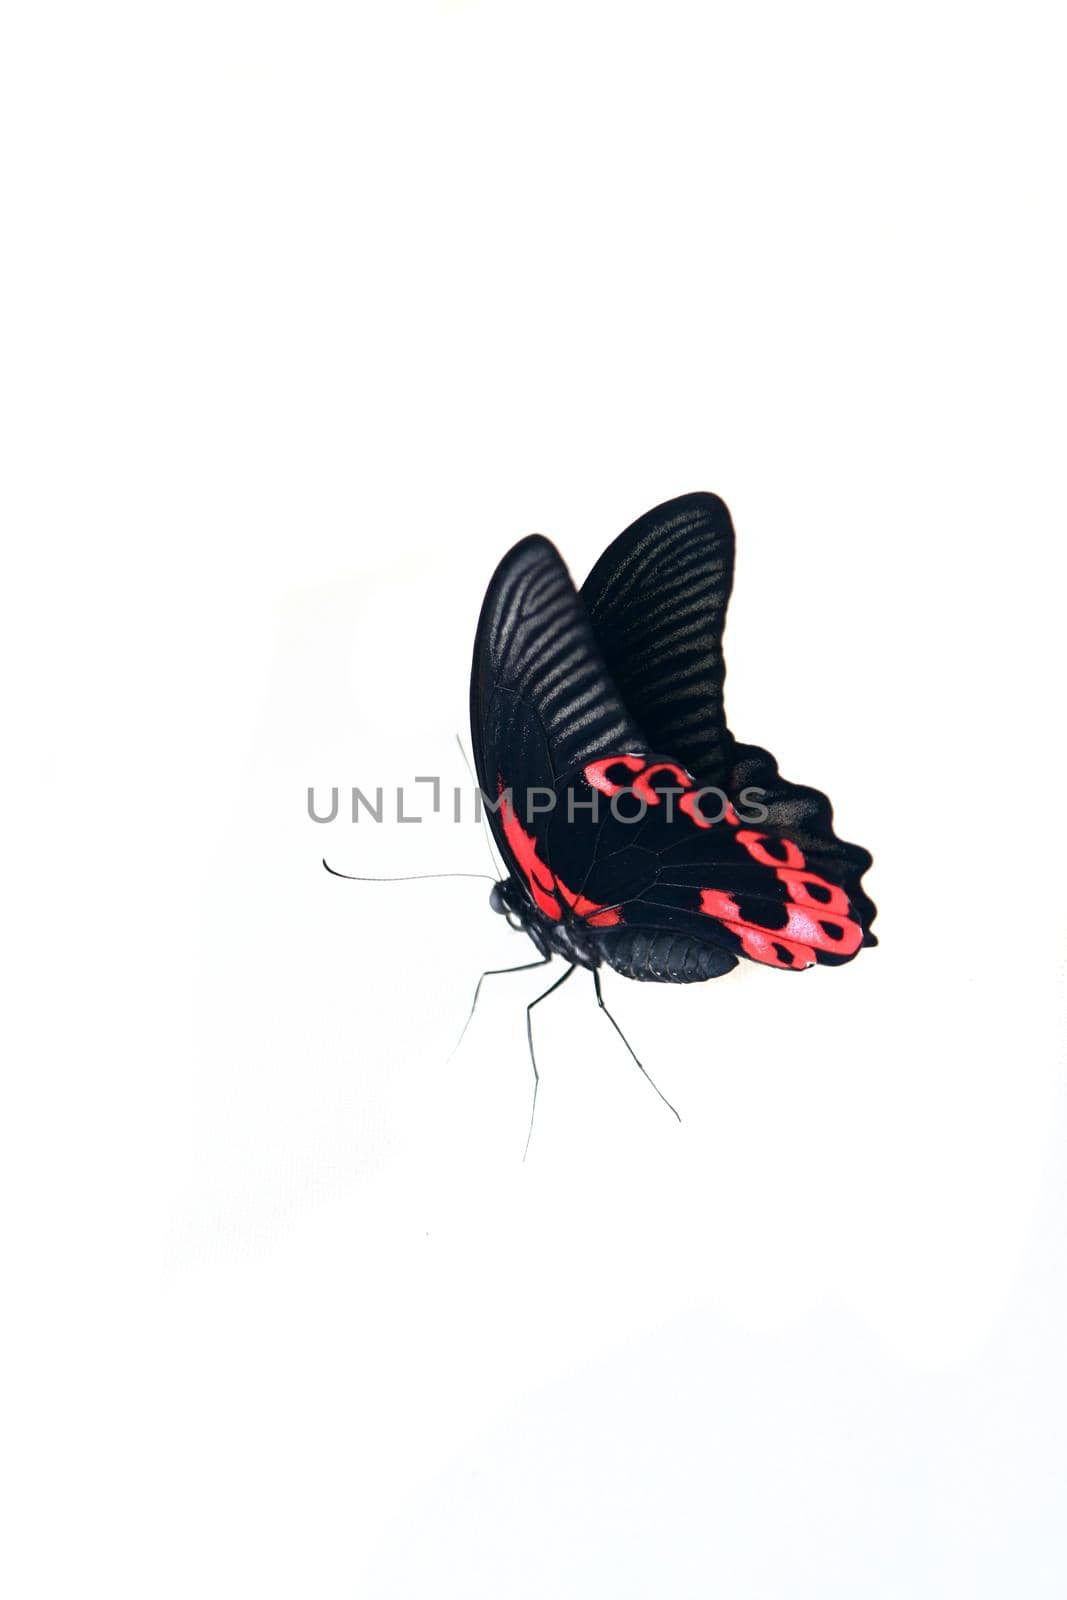 Papilio rumanzovia butterfly on white. by RosaJay